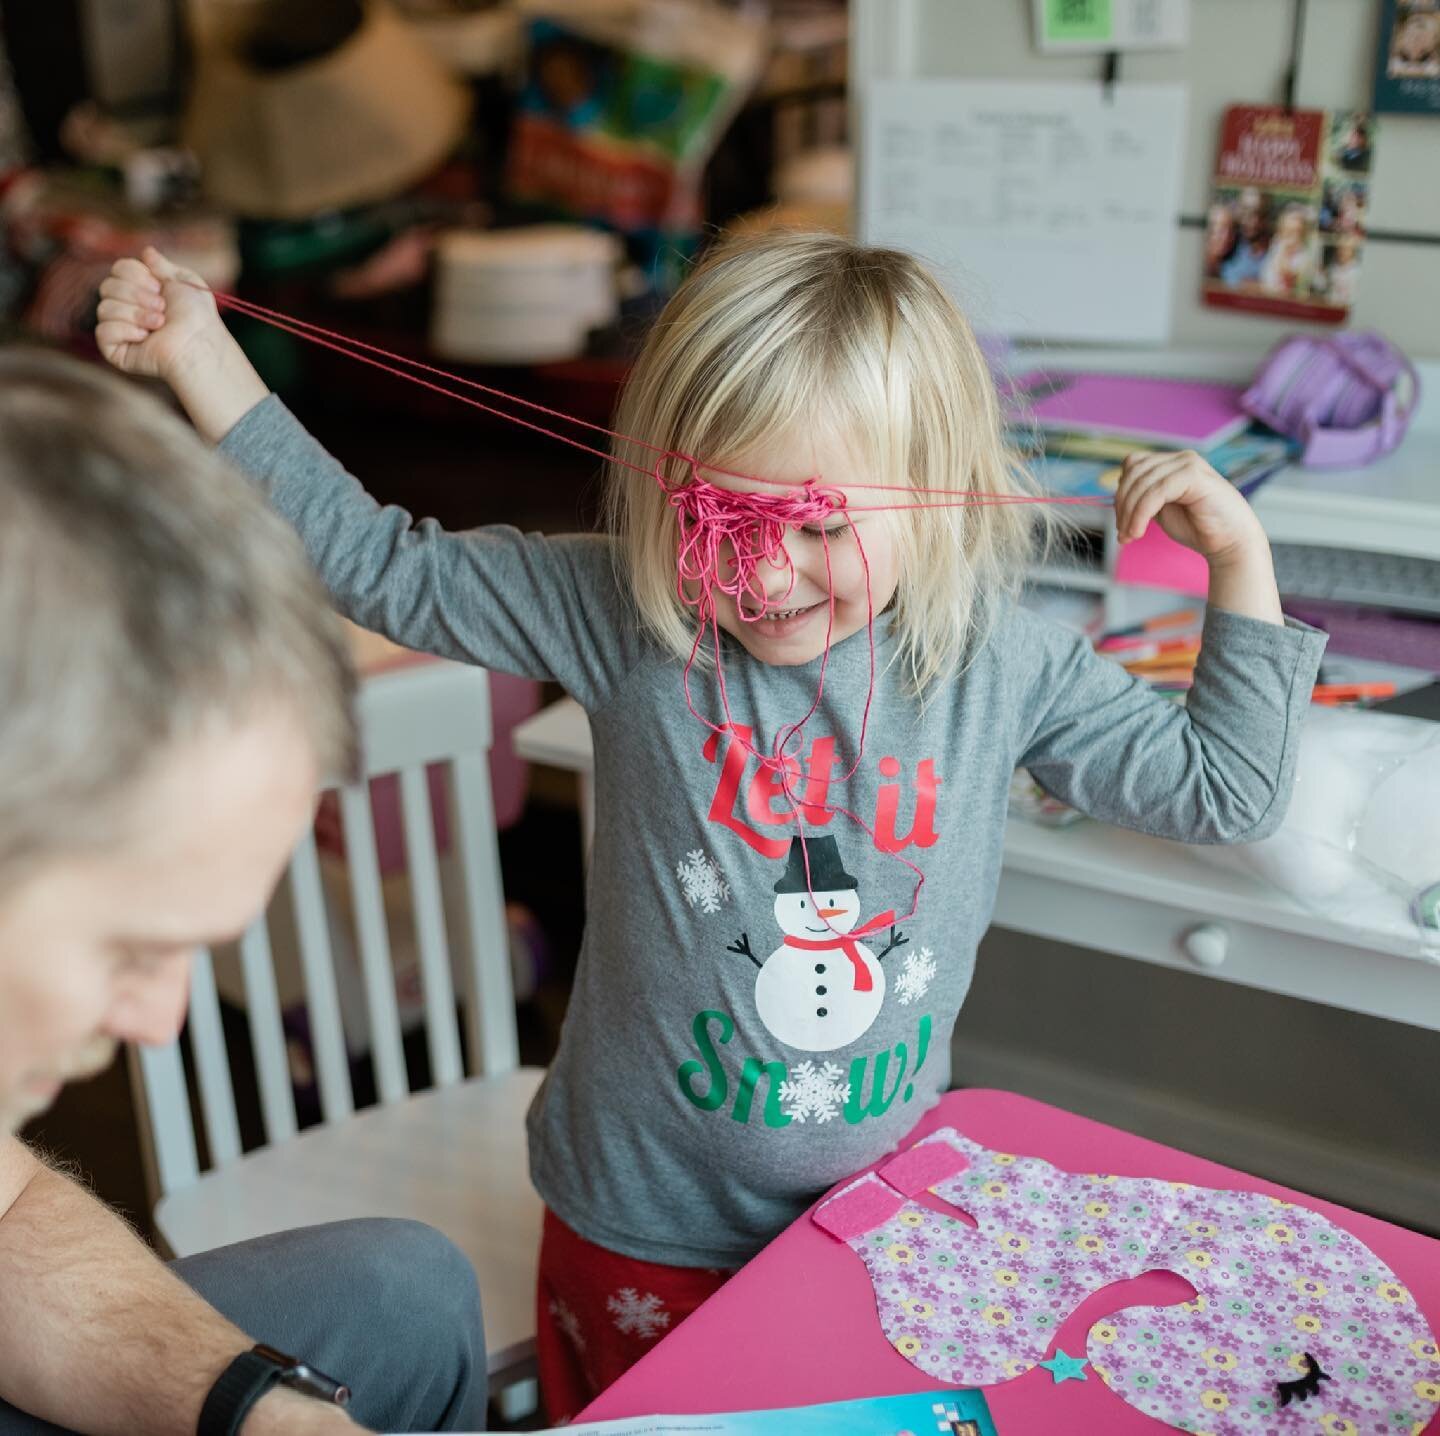 Hope find as much fun in your day as a four year old finds in yarn!
.
.
.
.
.
.

#capellephotography #ebec #okc #science #candidchildhood #childhood #childrensphotographer #dayinthelifeof #familyphotography #crafting #storytellingphotography ⁣
#happy